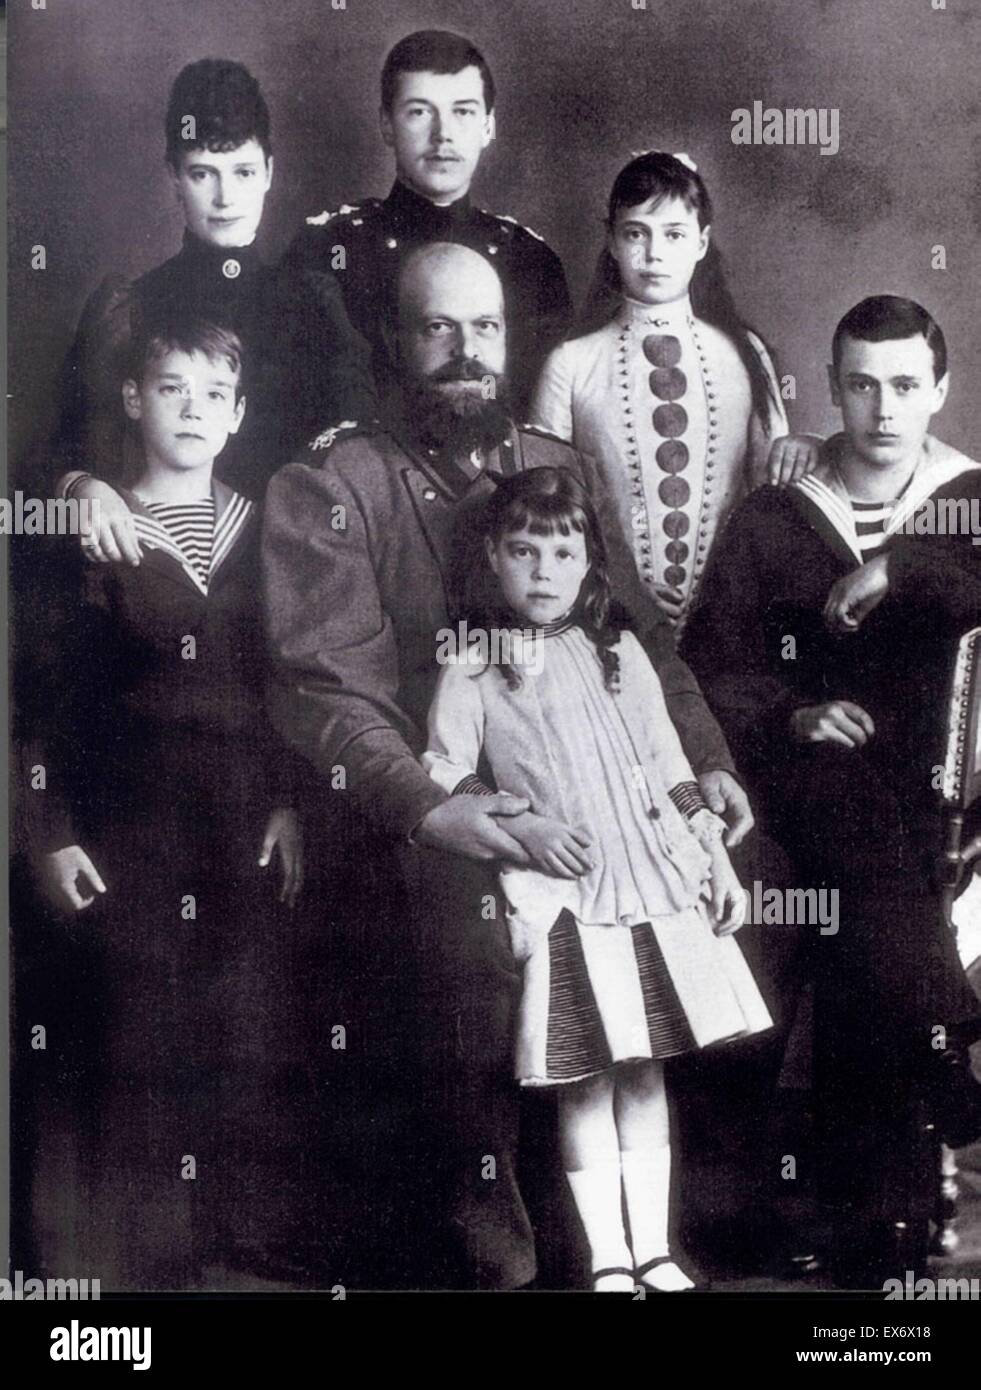 Photographic print of Alexander III of Russia, Emperor of Russia, King of Poland and Grand Prince of Finland (1845-1894) and his family. Dated 1886 Stock Photo